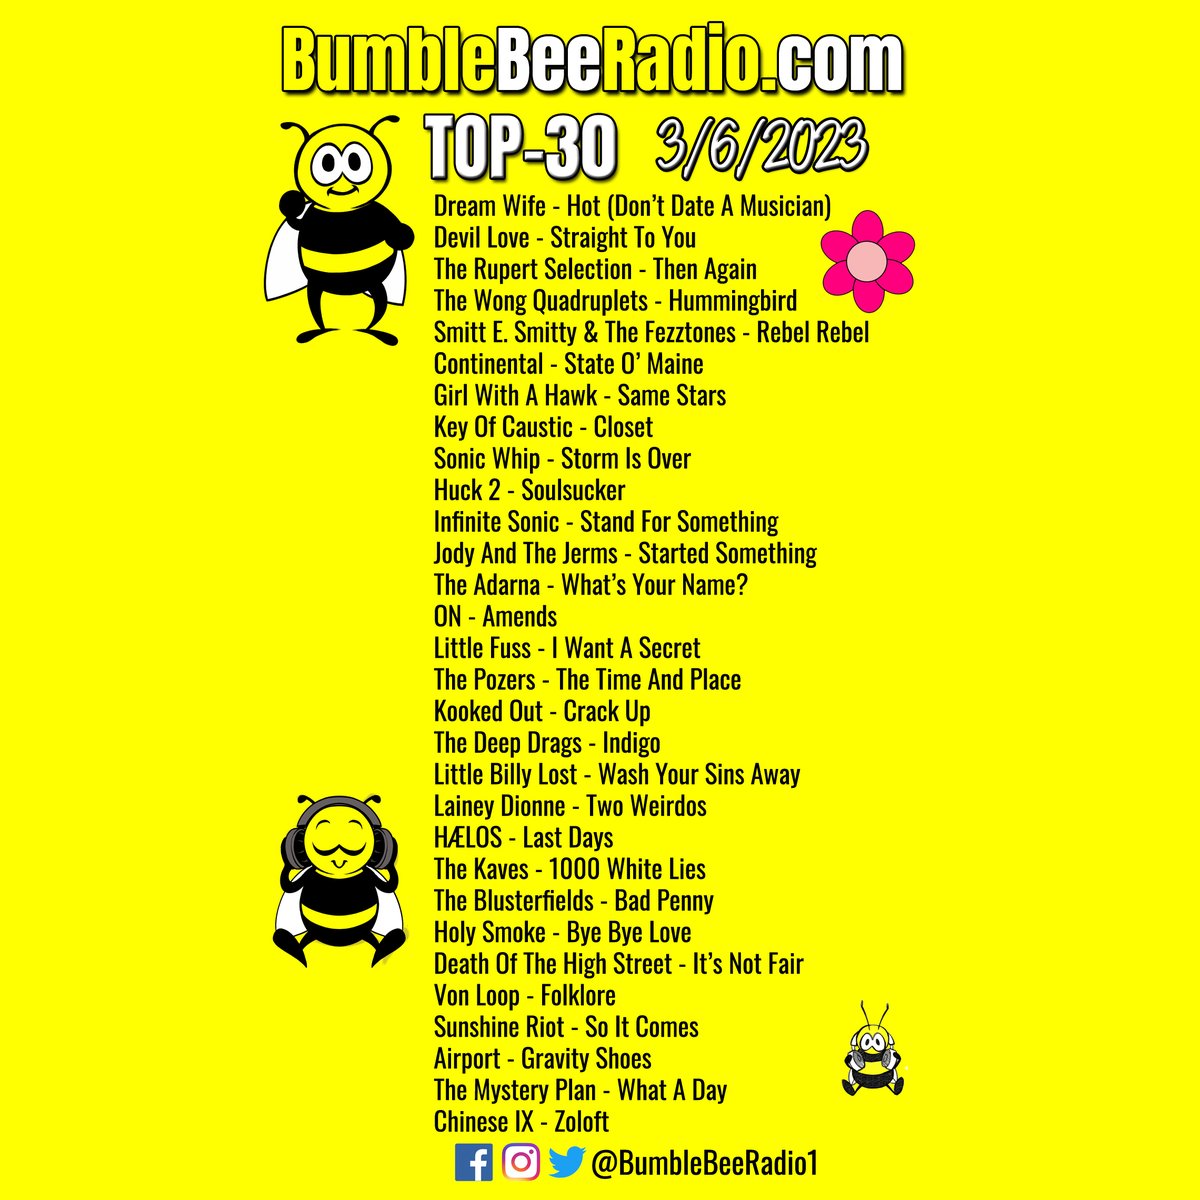 Monday 3/6/23: Here are the Top-30 songs based on airplay over the past week on BumbleBee Radio... As as always than you for listening! @KristenEckRadio 📻🐝🎶🎵 #Indie #Alternative #BostonMusic #InternetRadio #Top30